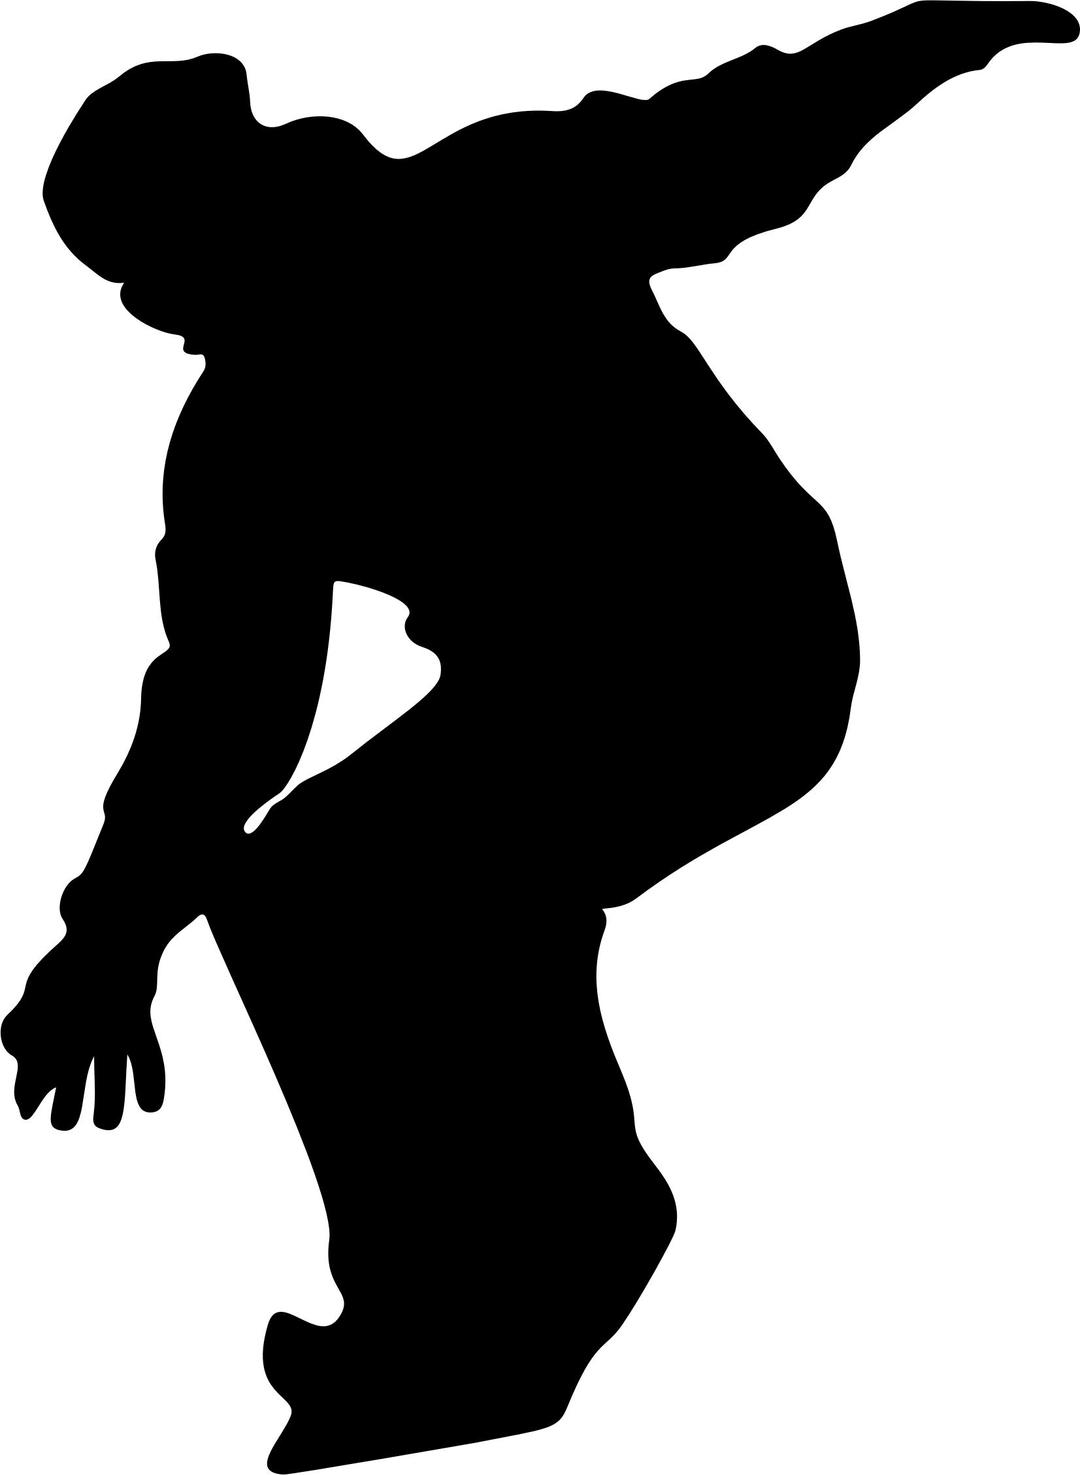 Snowboarder Silhouette png transparent